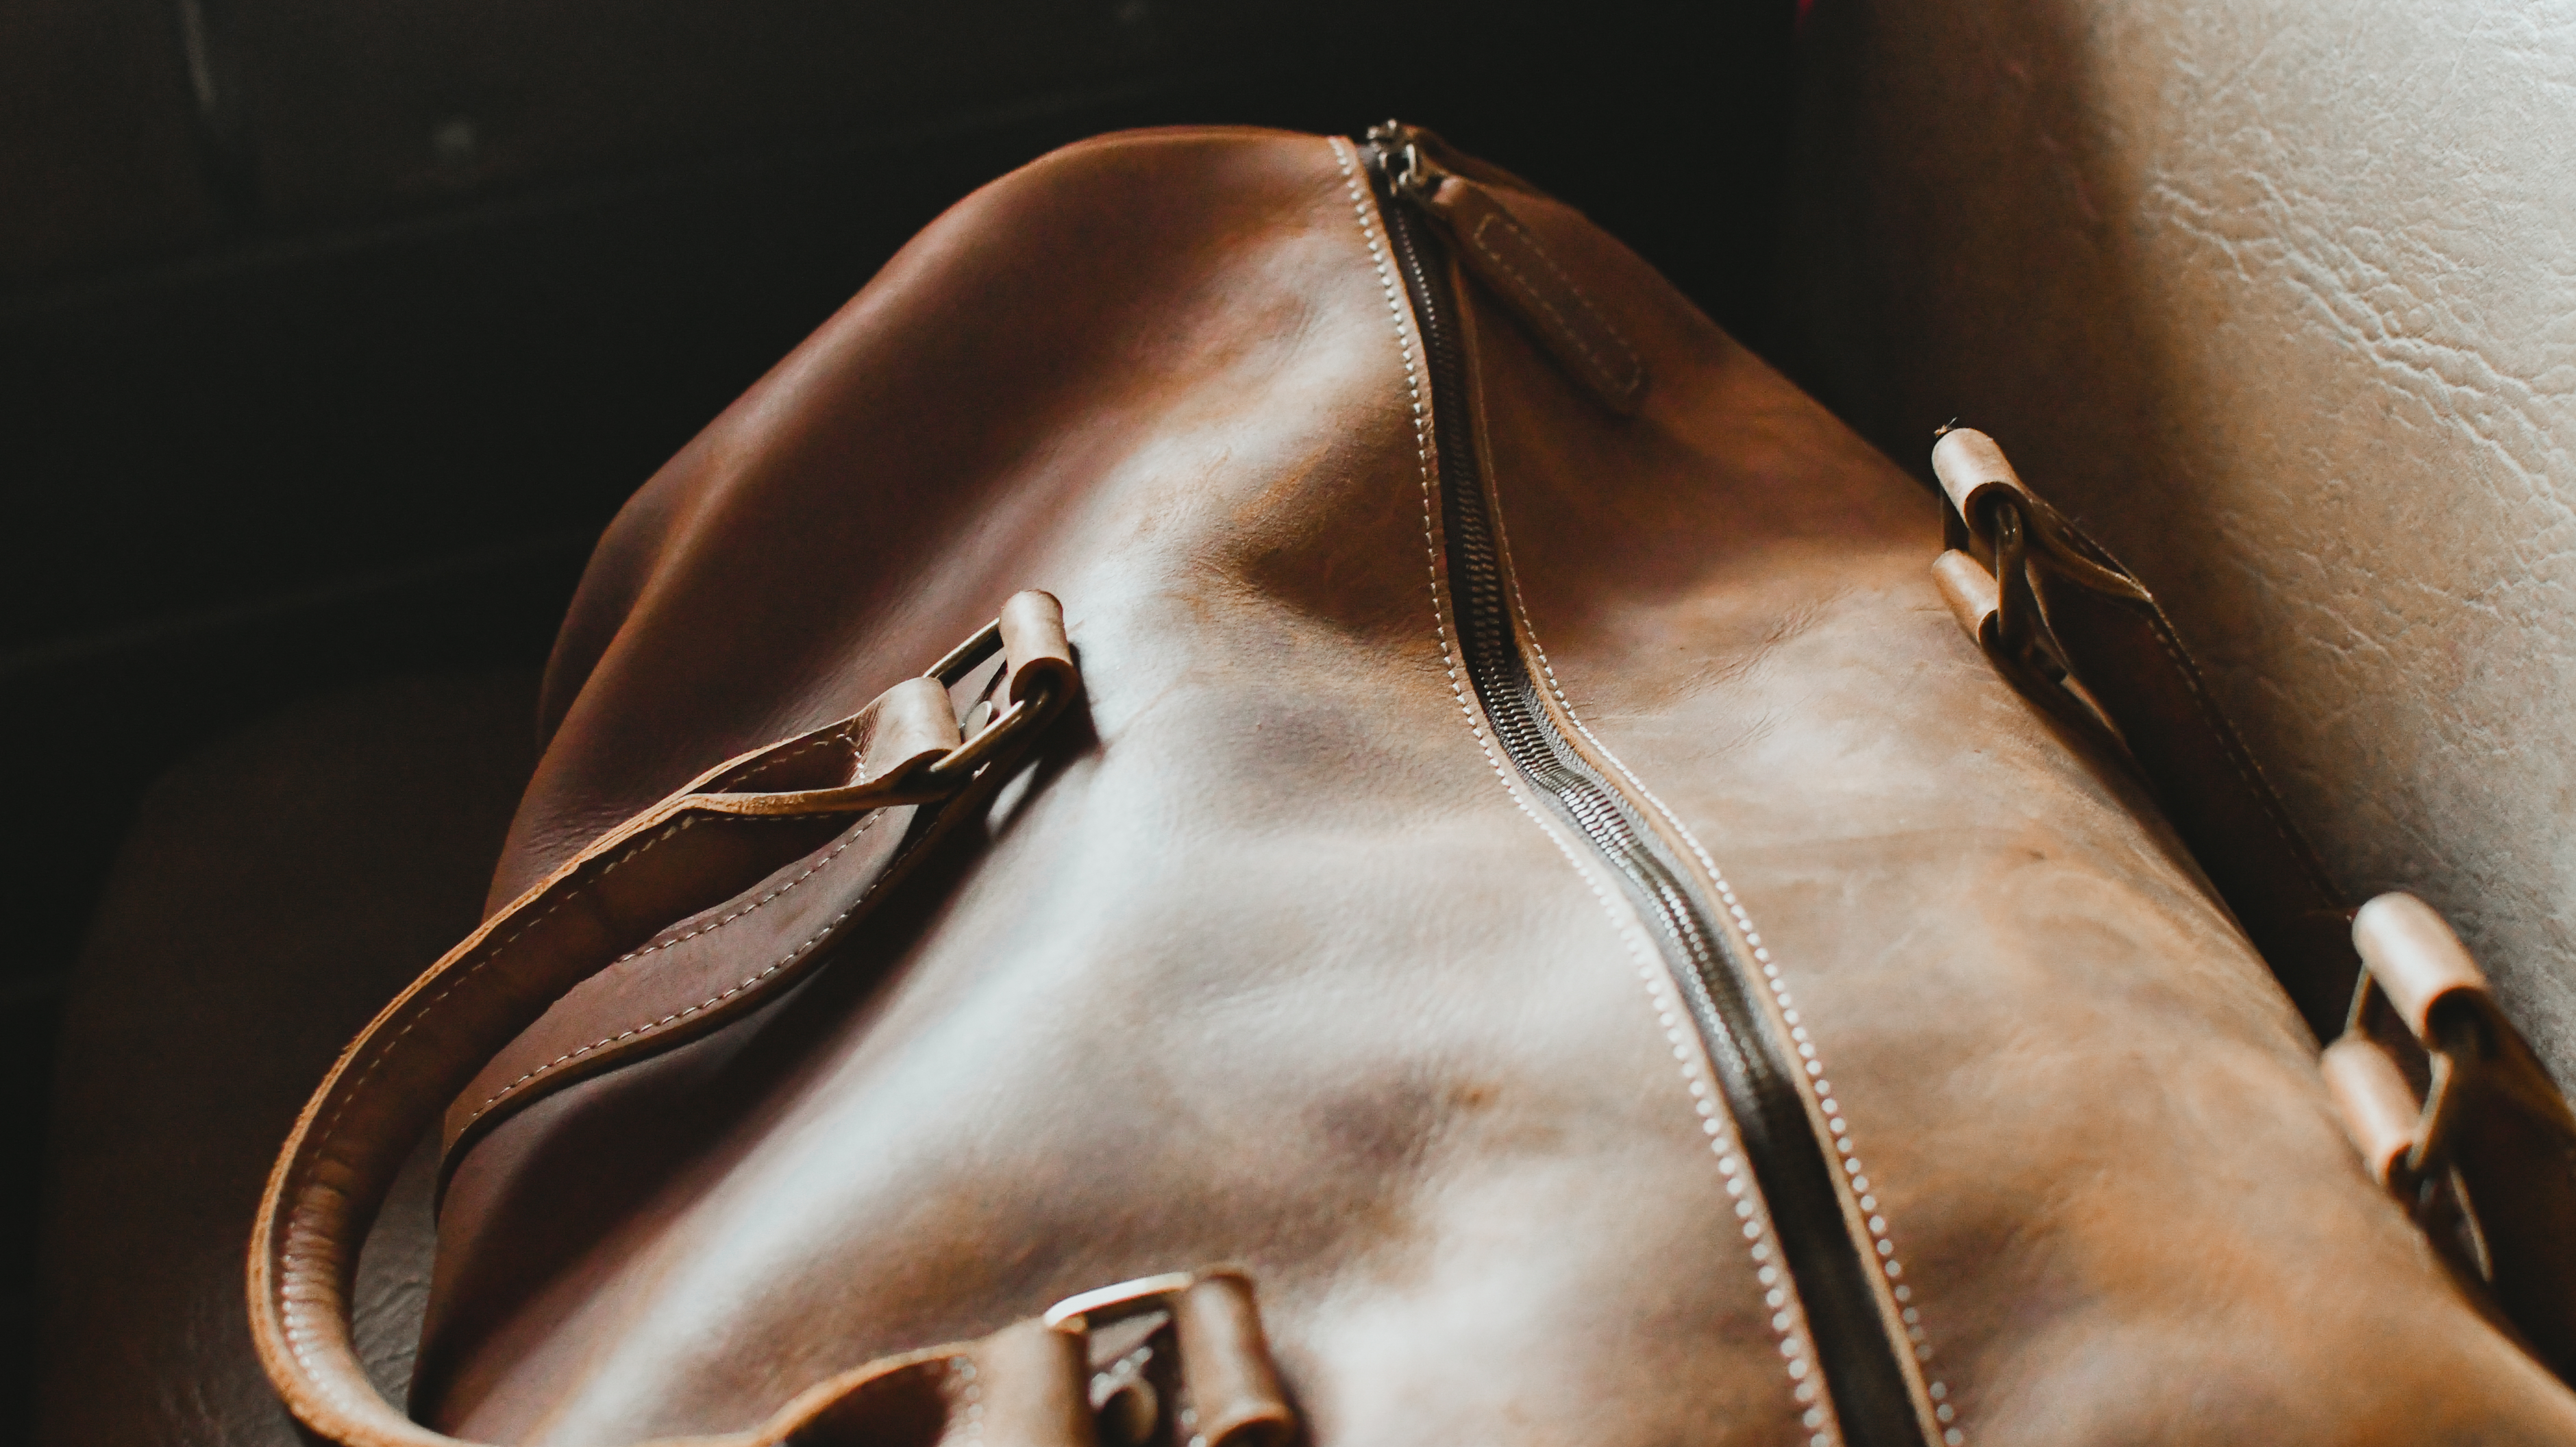 The Complete Guide to Leather Duffel Bags: Everything You Need to